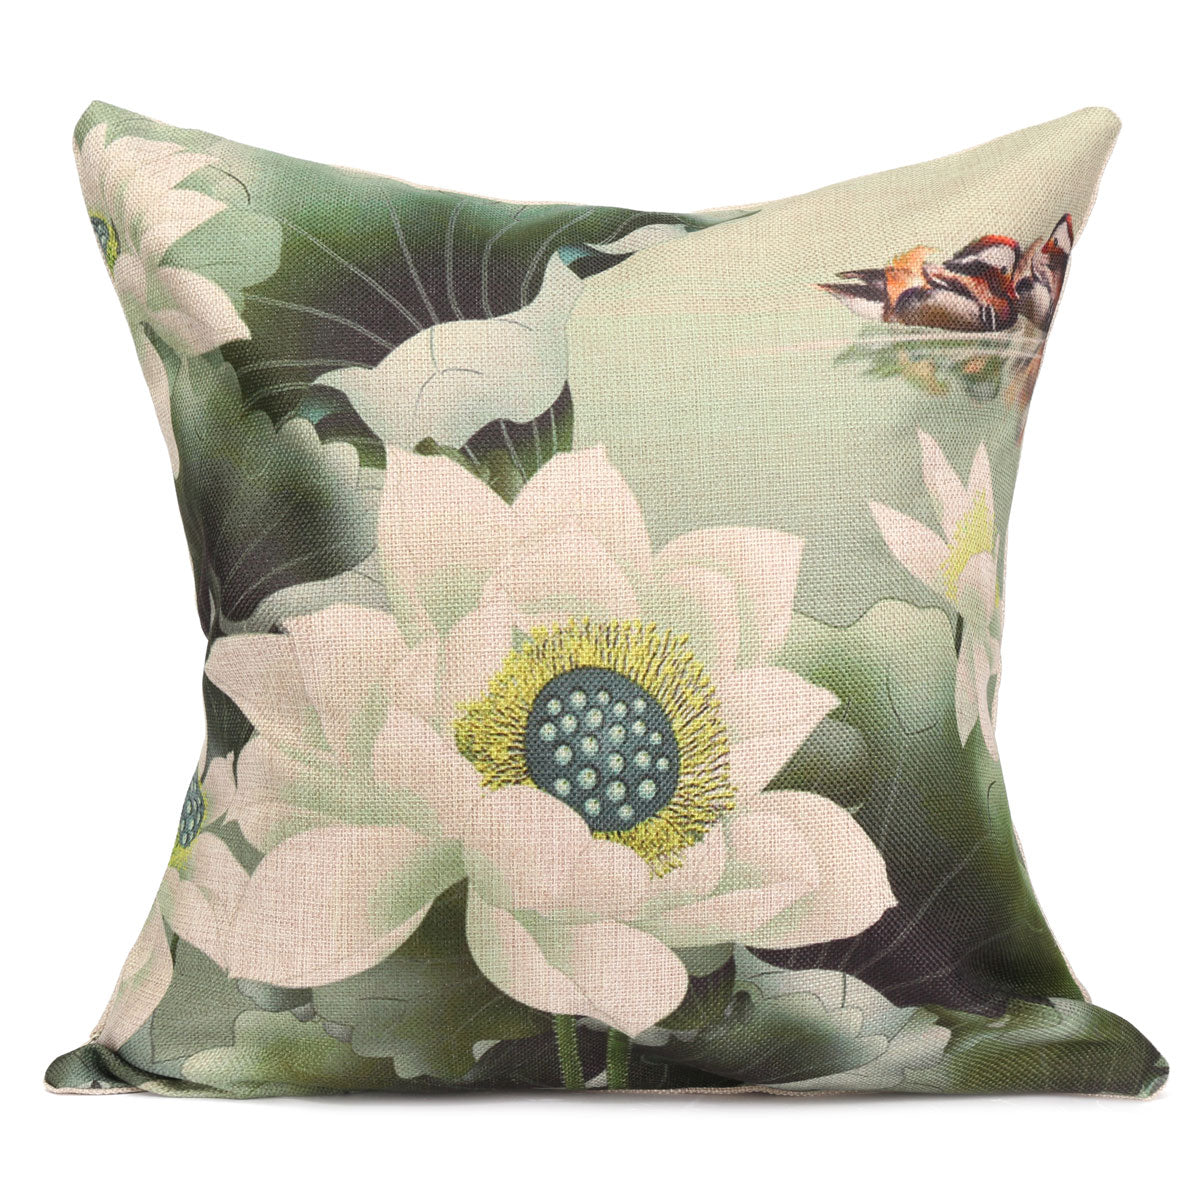 Chinese Ink Lotus Series Throw Pillow Case Cotton Linen Cushion Cover Home Sofa Decor